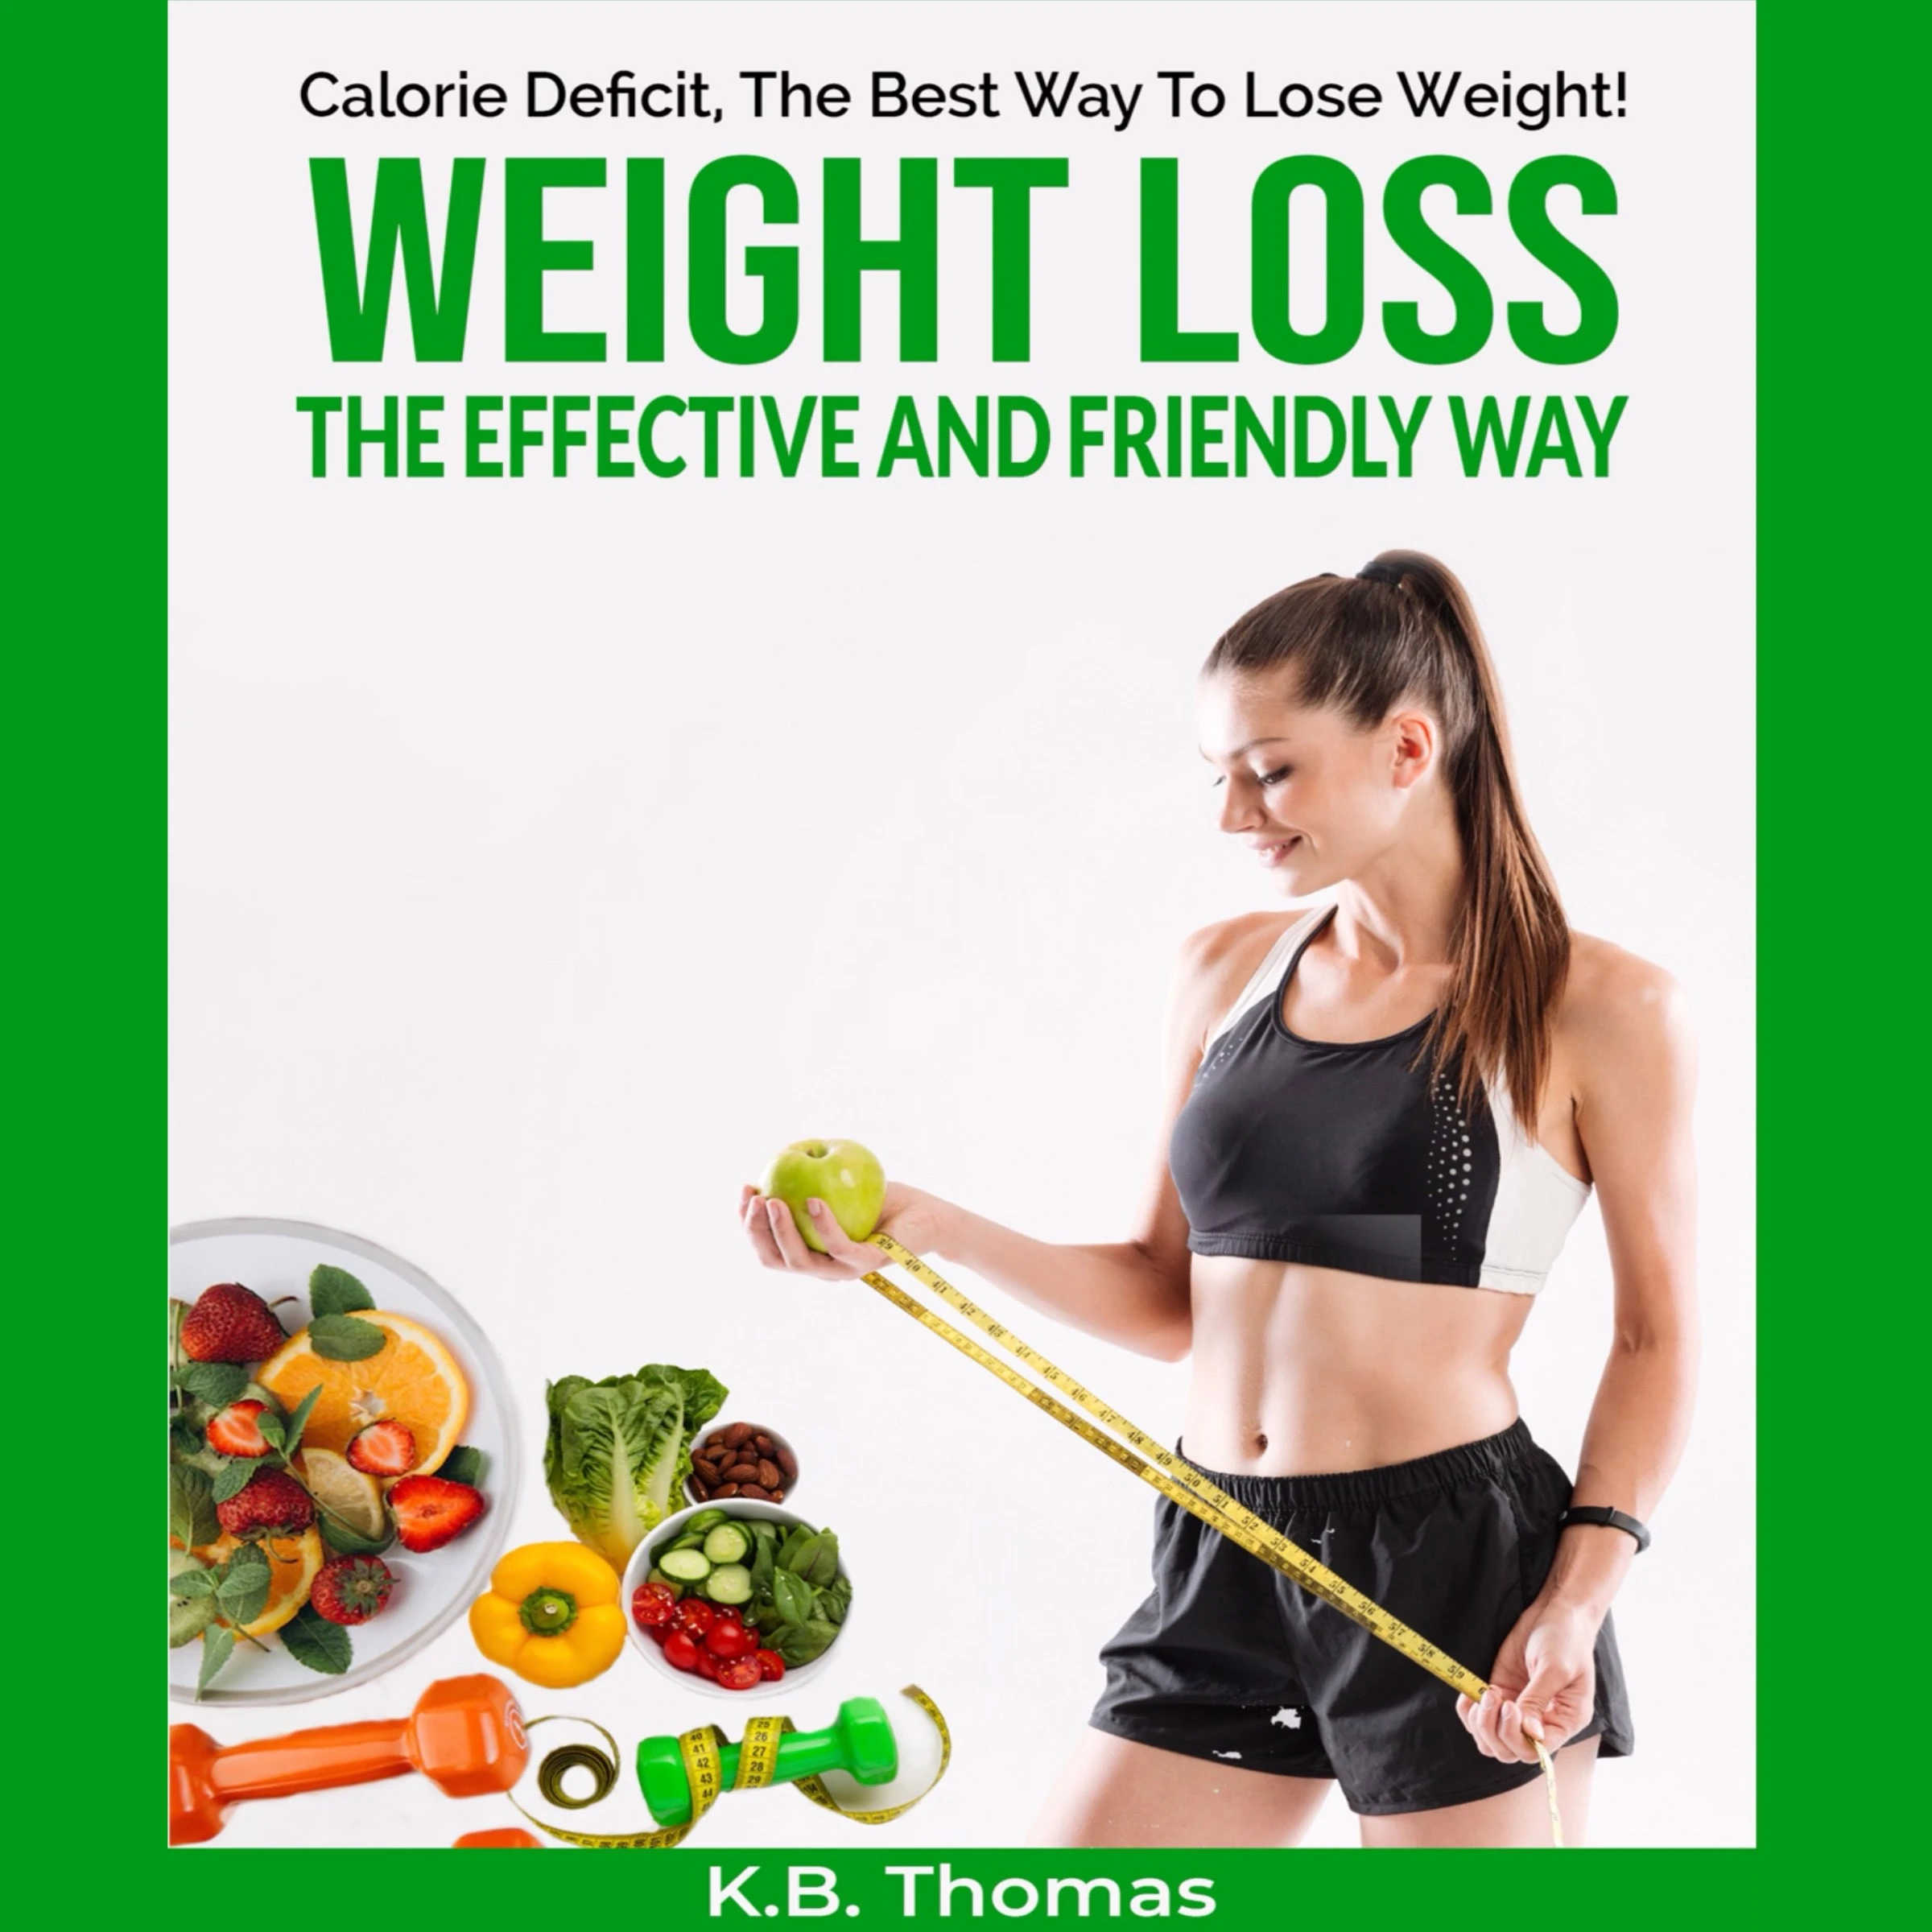 Calorie Deficit, The Best Way To Lose Weight! Audiobook by K B. Thomas